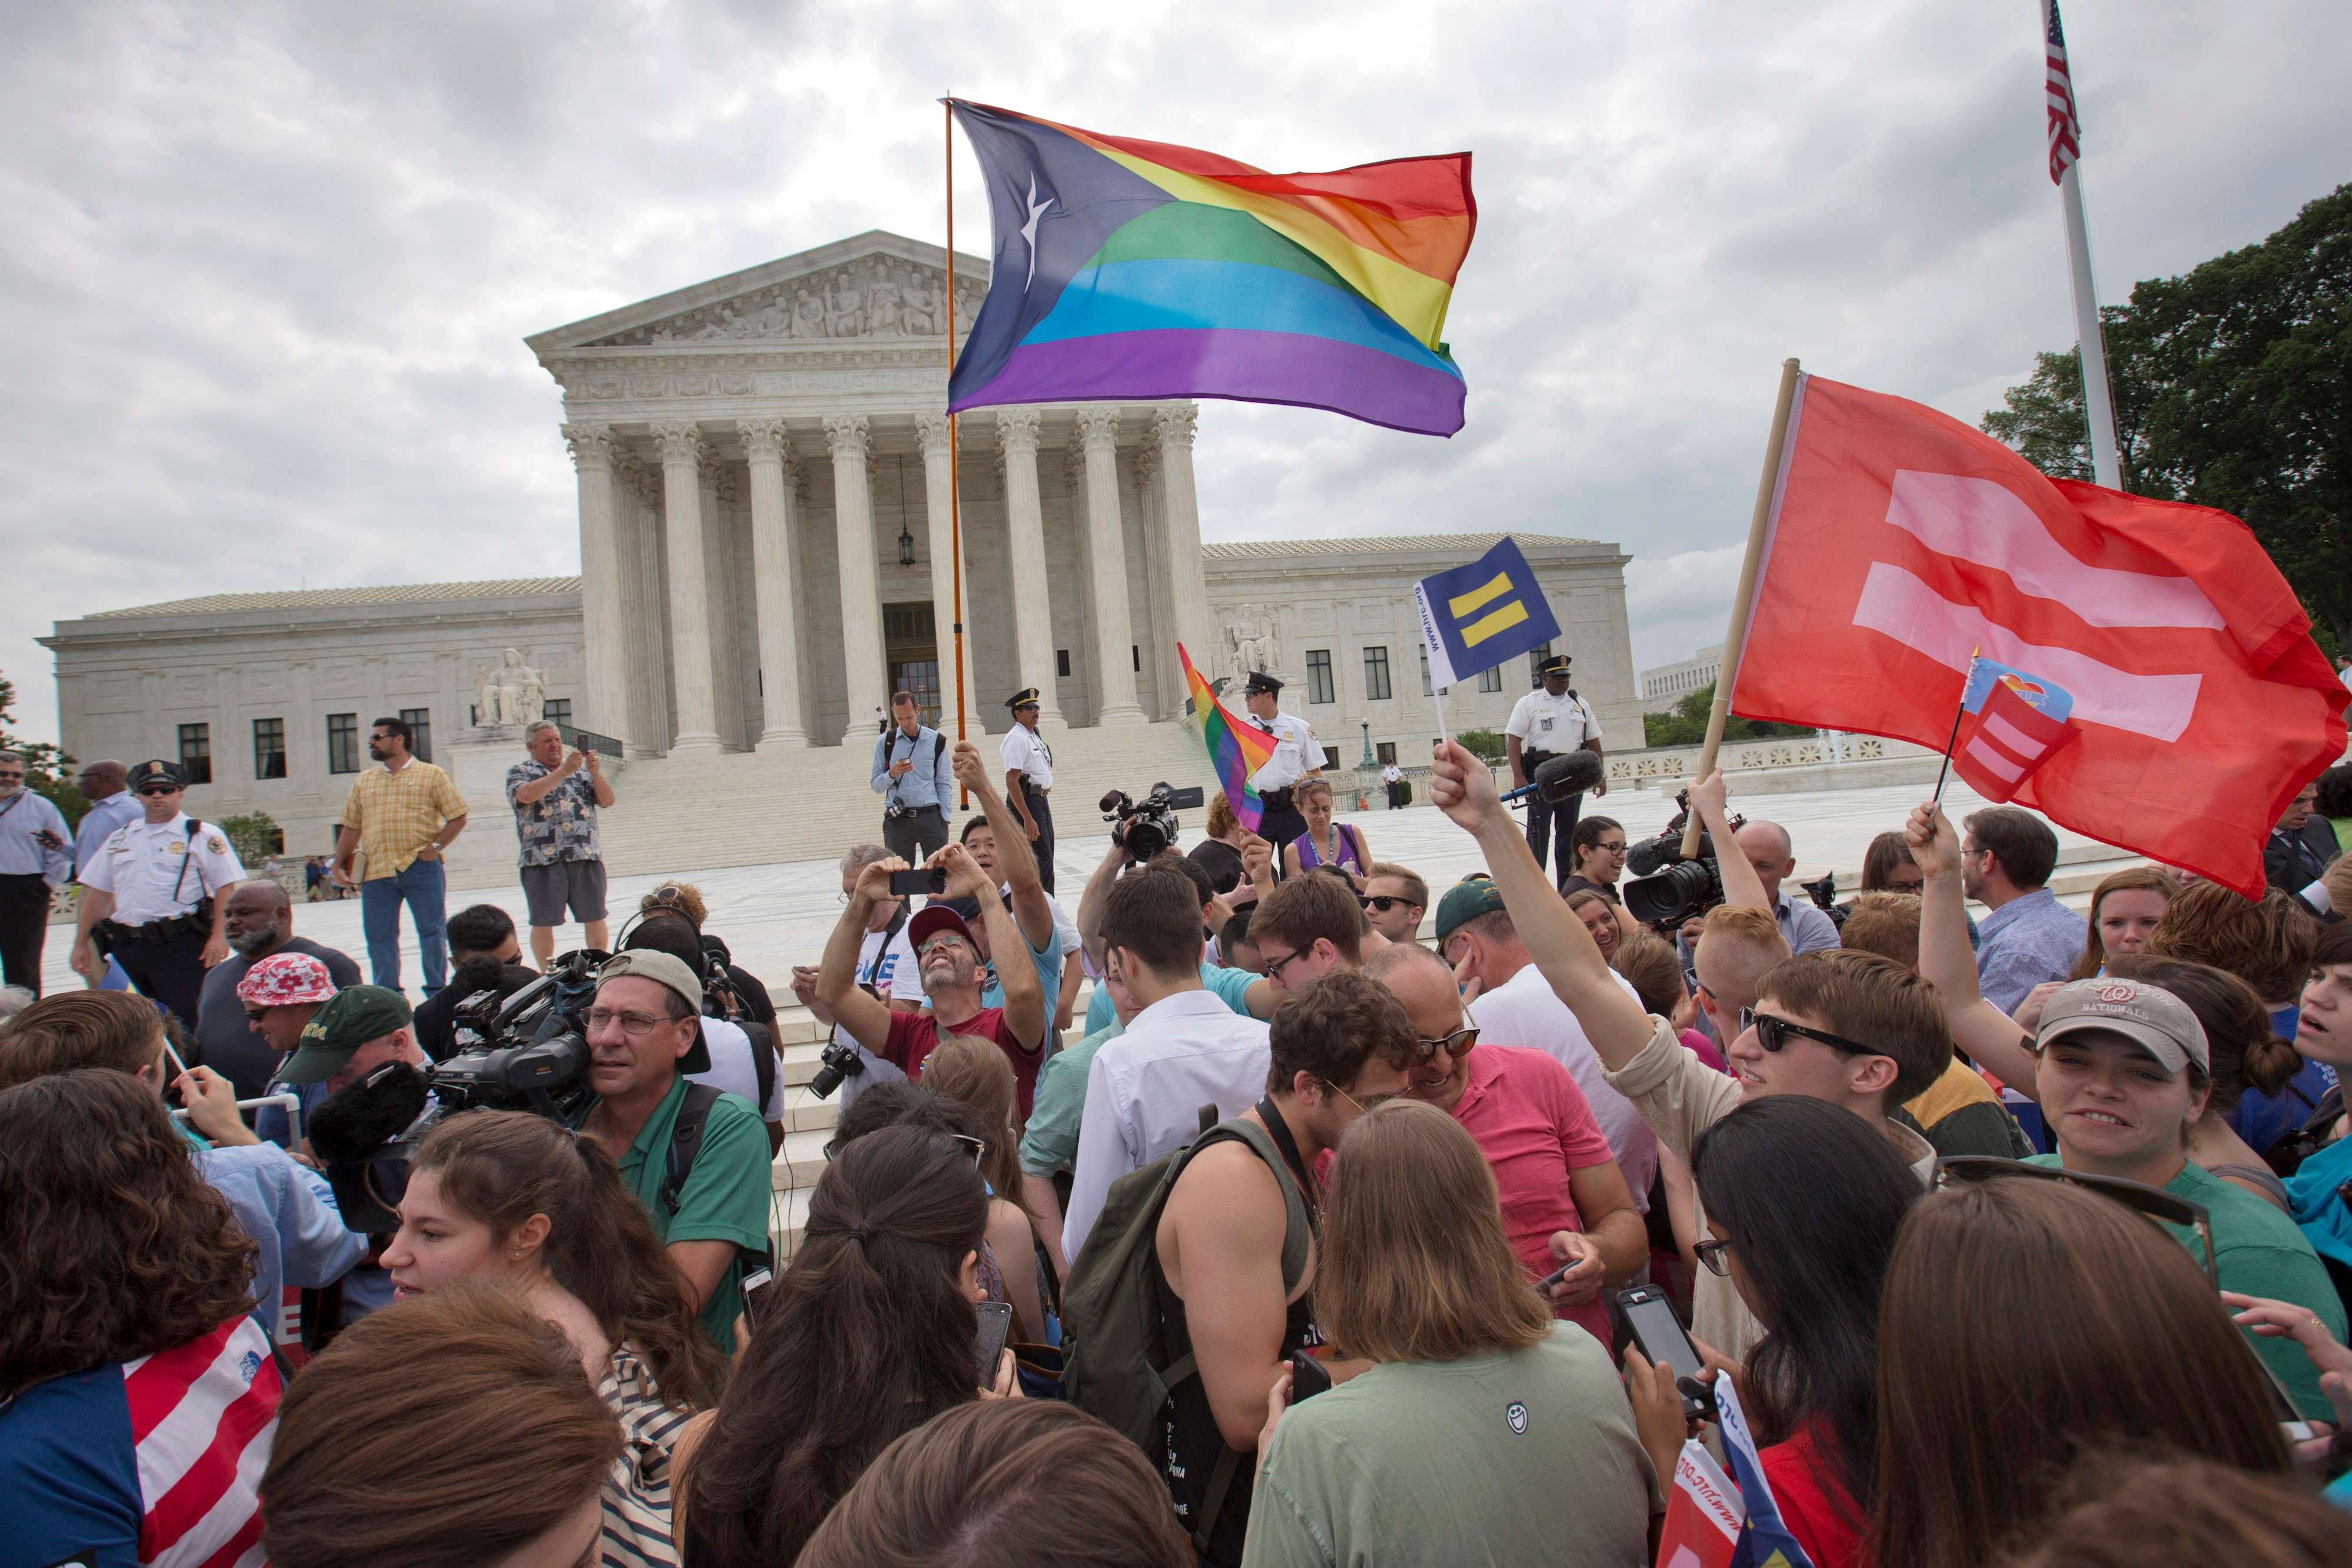 The crowd reacts as the ruling on same-sex marriage was announced outside of the Supreme Court in Washington, Friday June 26, 2015. The Supreme Court declared Friday that same-sex couples have a right to marry anywhere in the US. (AP Photo/Jacquelyn Martin)